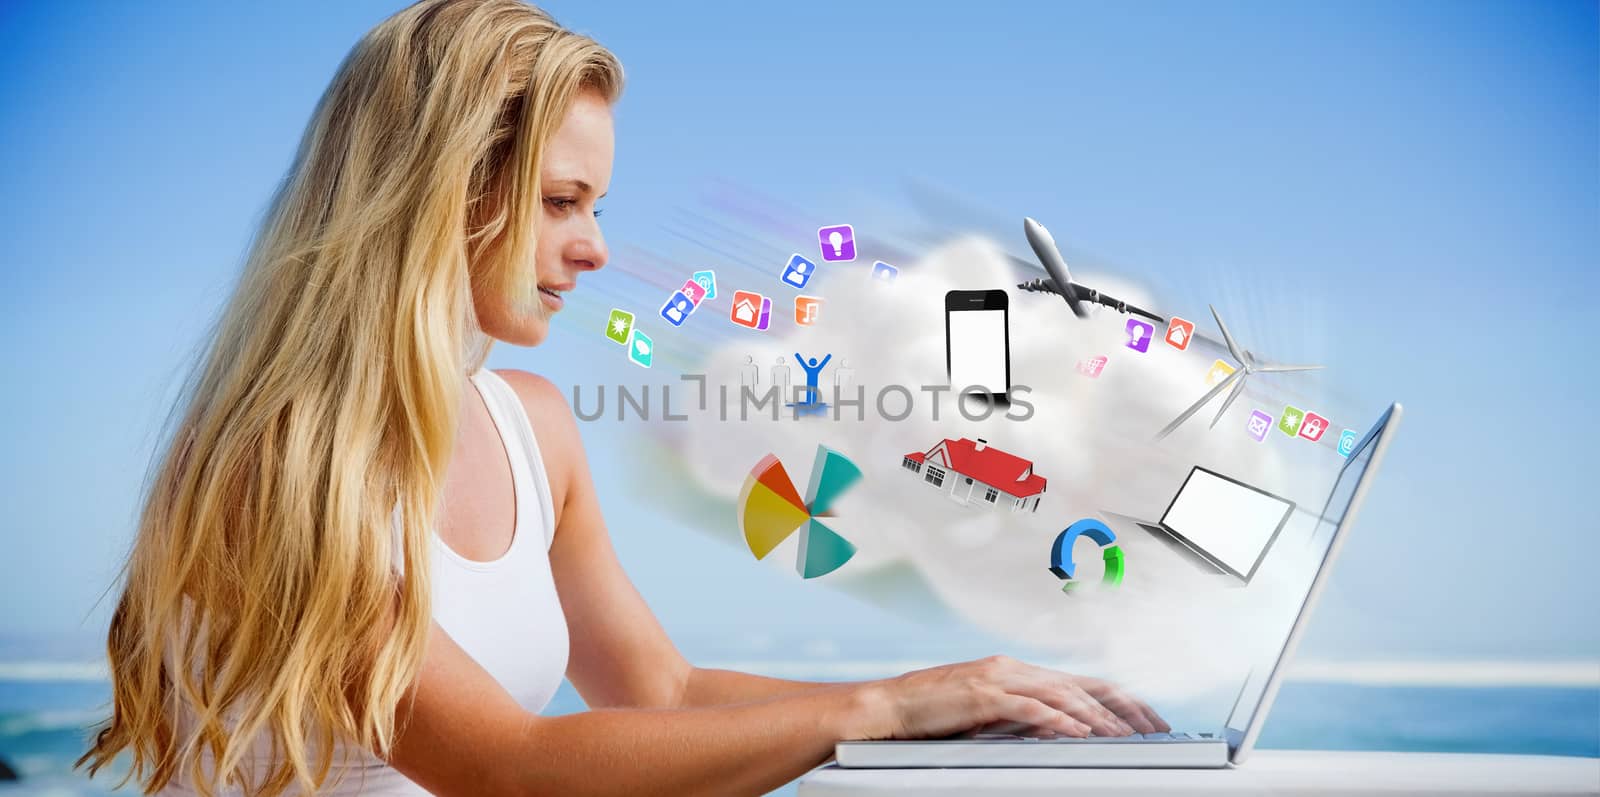 Pretty blonde using her laptop at the beach against cloud computing graphic with apps